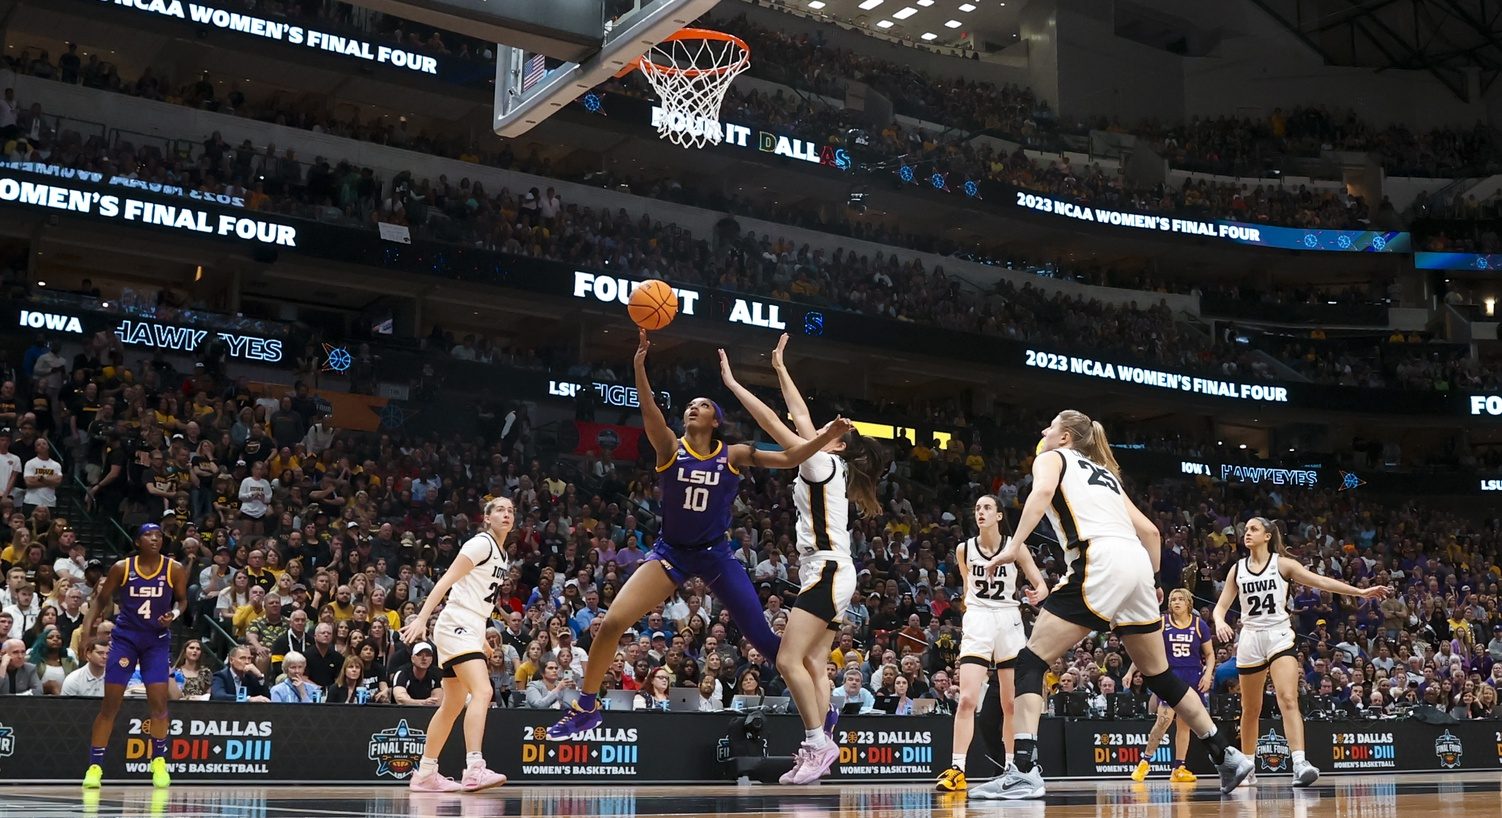 LSU Lady Tigers forward Angel Reese (10) shoots the ball against the Iowa Hawkeyes in the first half during the final round of the Women's Final Four NCAA tournament at the American Airlines Center.